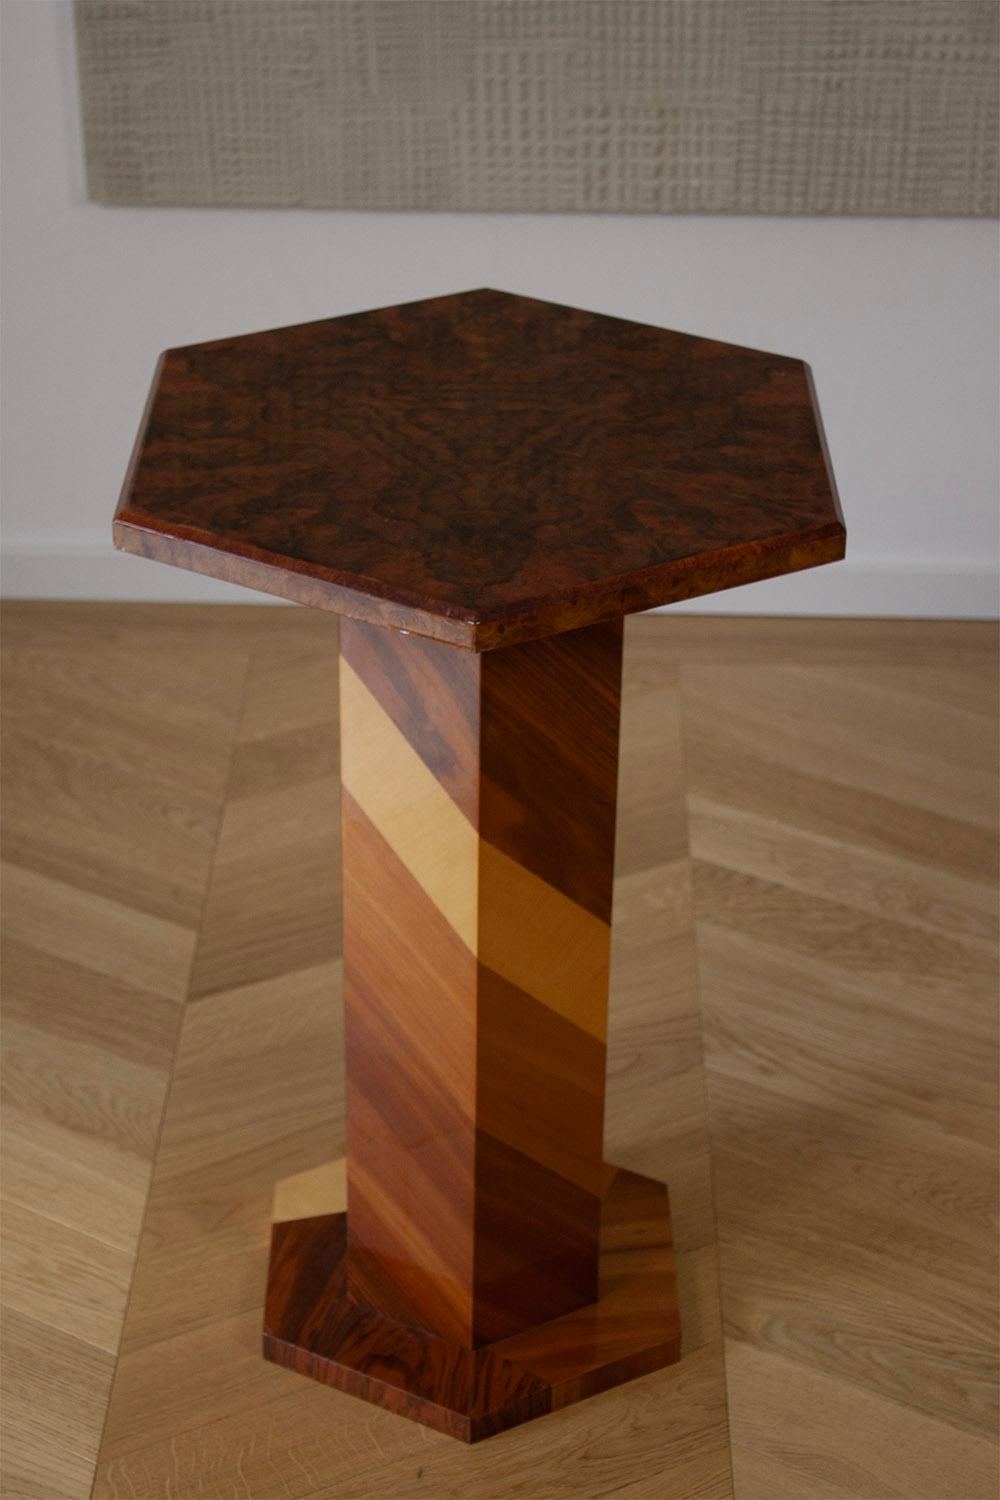 Mosaic Striped Artisan Made Wooden Column Table Side Table Pedestal with Burl wood Top For Sale